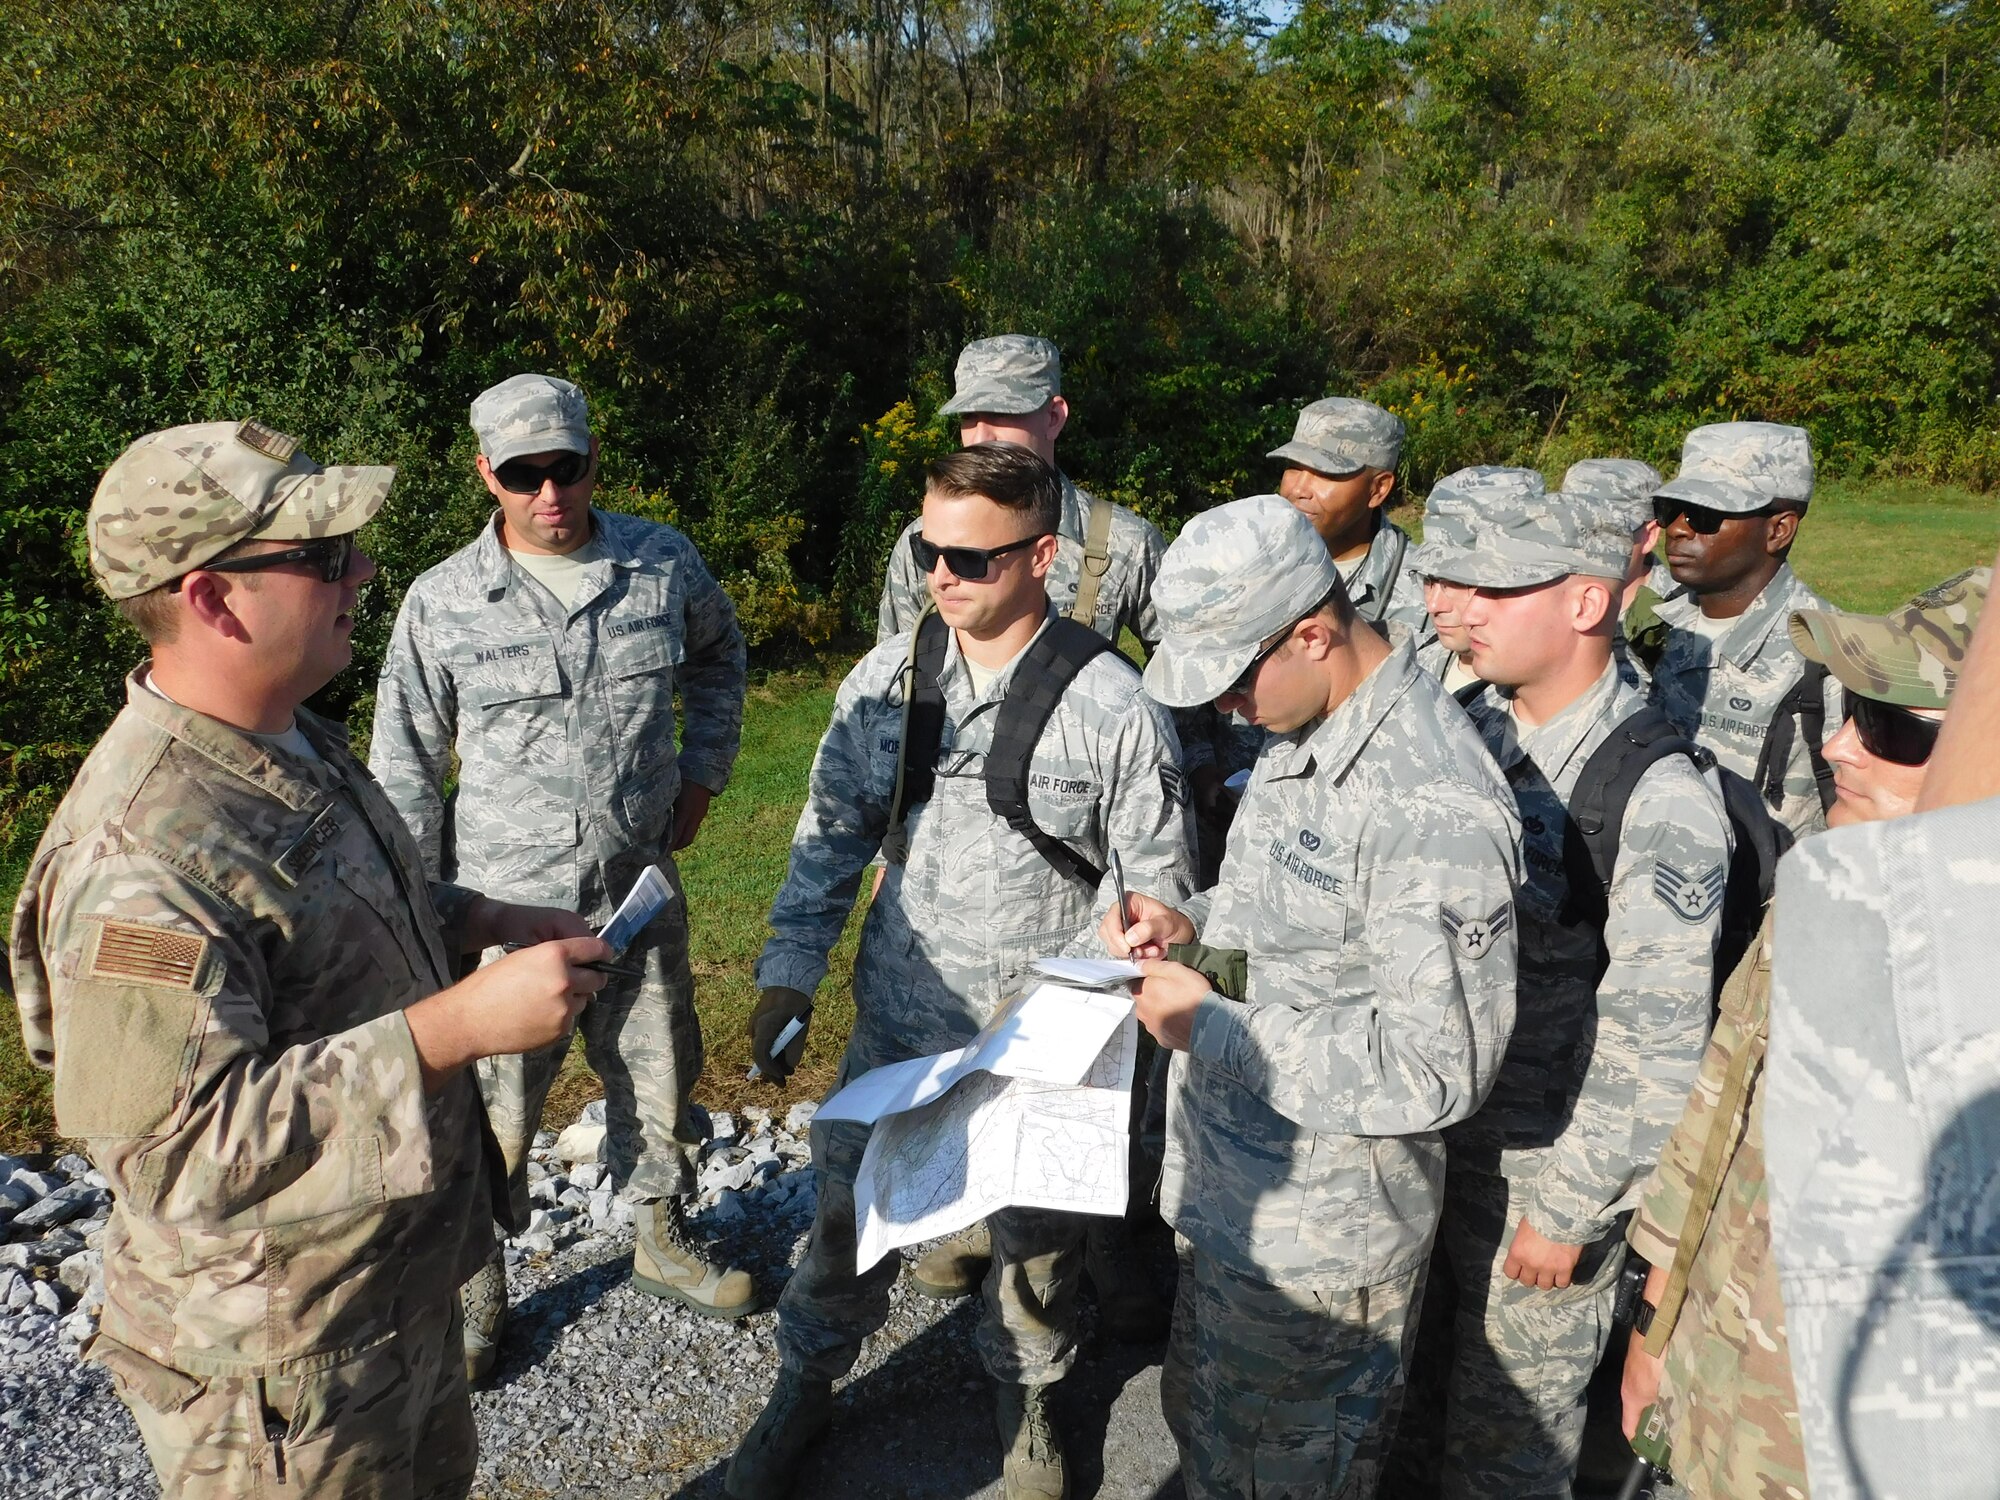 Staff Sgt. William Spencer, 436th Civil Engineer Squadron explosive ordnance disposal NCO in charge of training, instructs land navigation to other civil engineers Sept. 21, 2017, during a field training exercise at Fort Indiantown Gap, Pa. Air Force civil engineers establish bare-bases and runways in austere locations, maintaining infrastructure and providing security for their assets. (Courtesy photo)